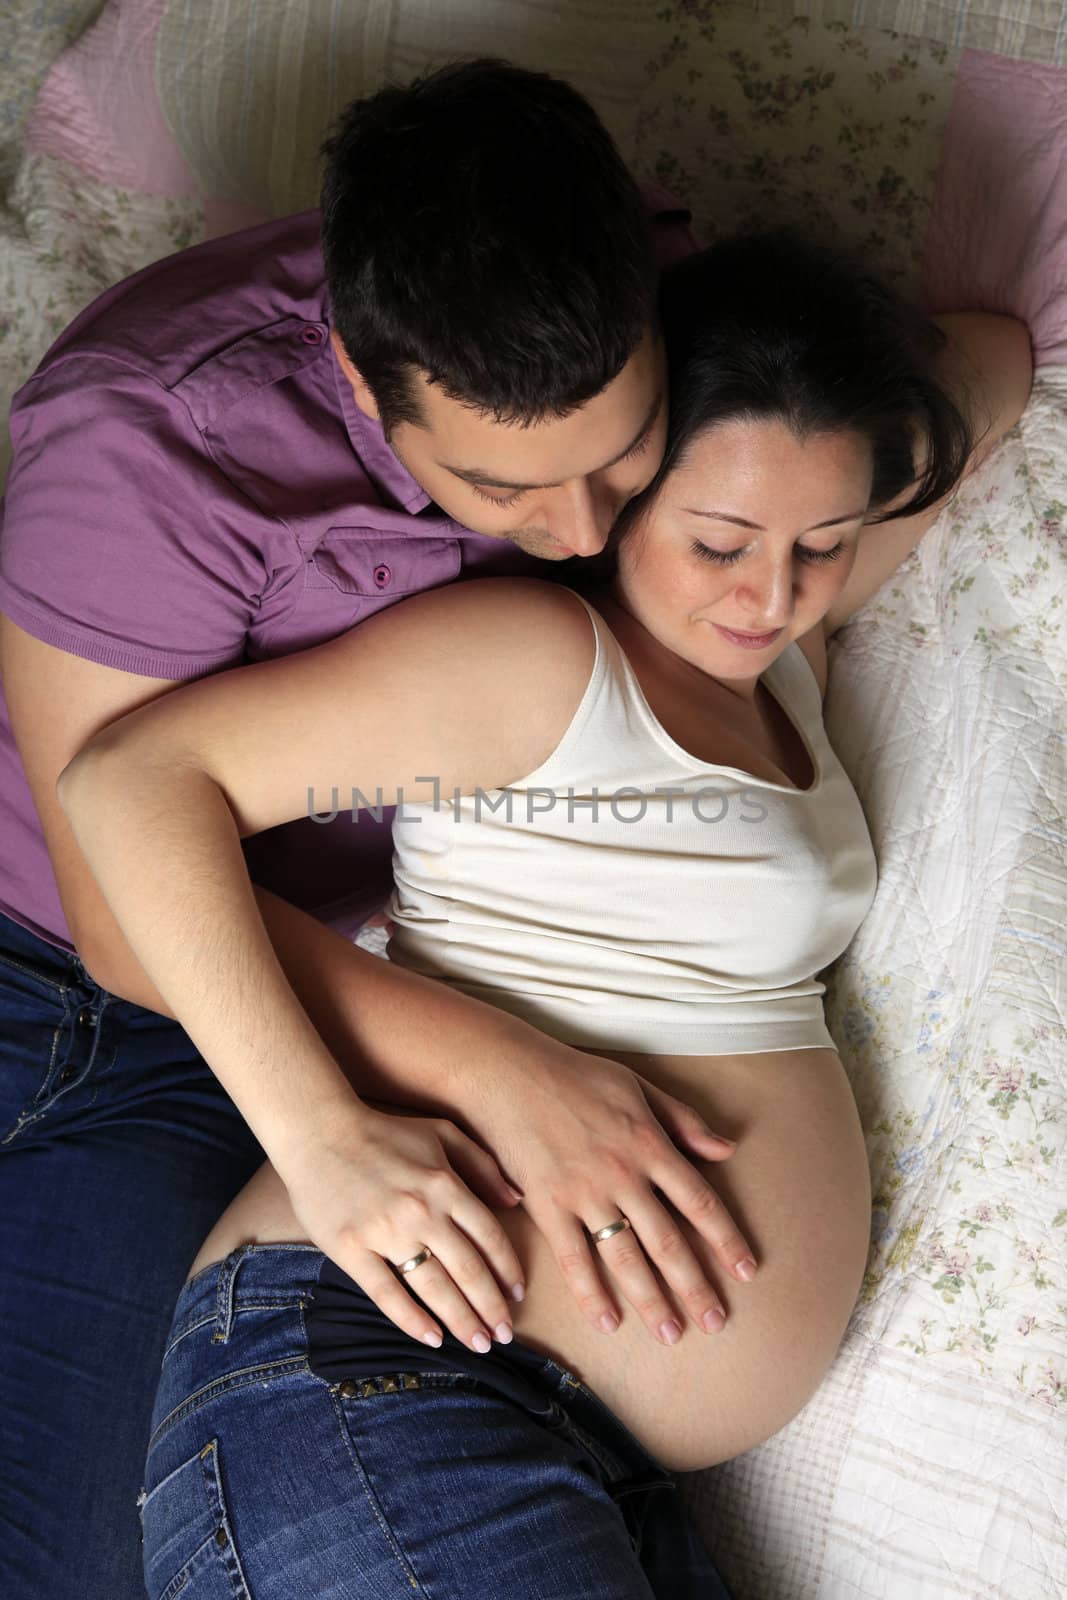 Portrait of a happy pregnant woman and of her husband at home